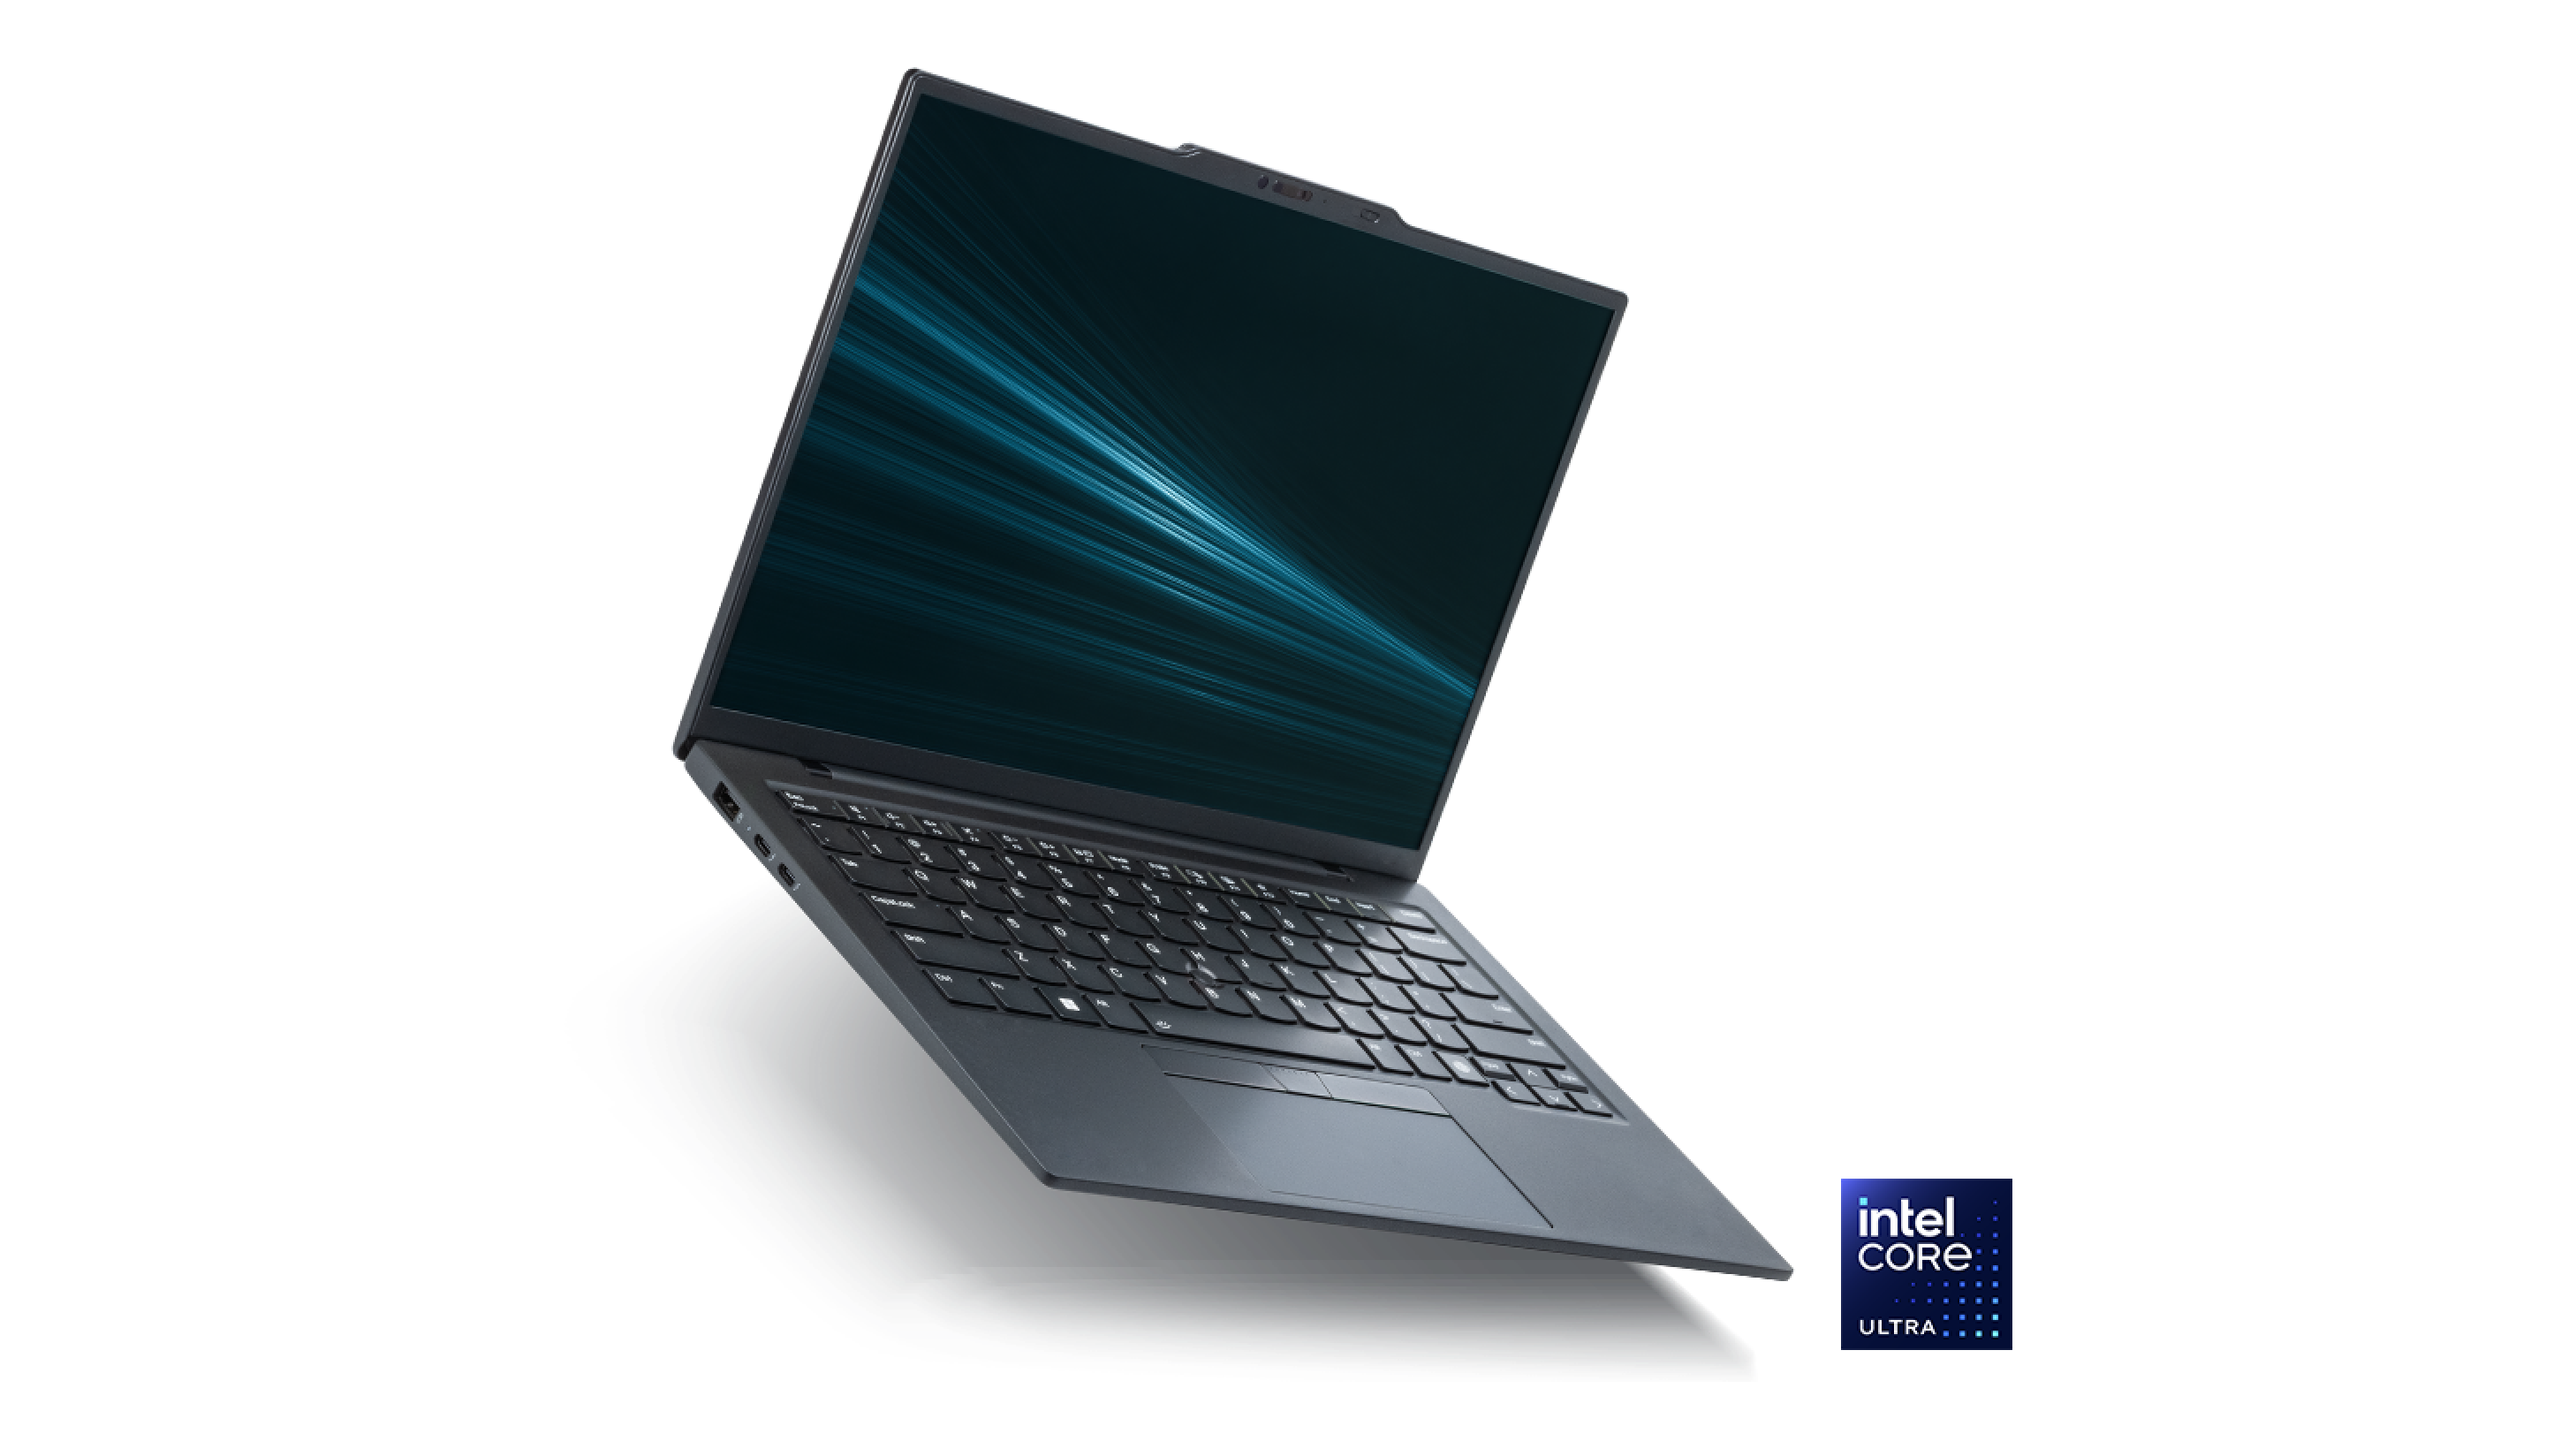 The Intel® Evo™ Edition laptop equipped with an Intel® Core™ Ultra processor